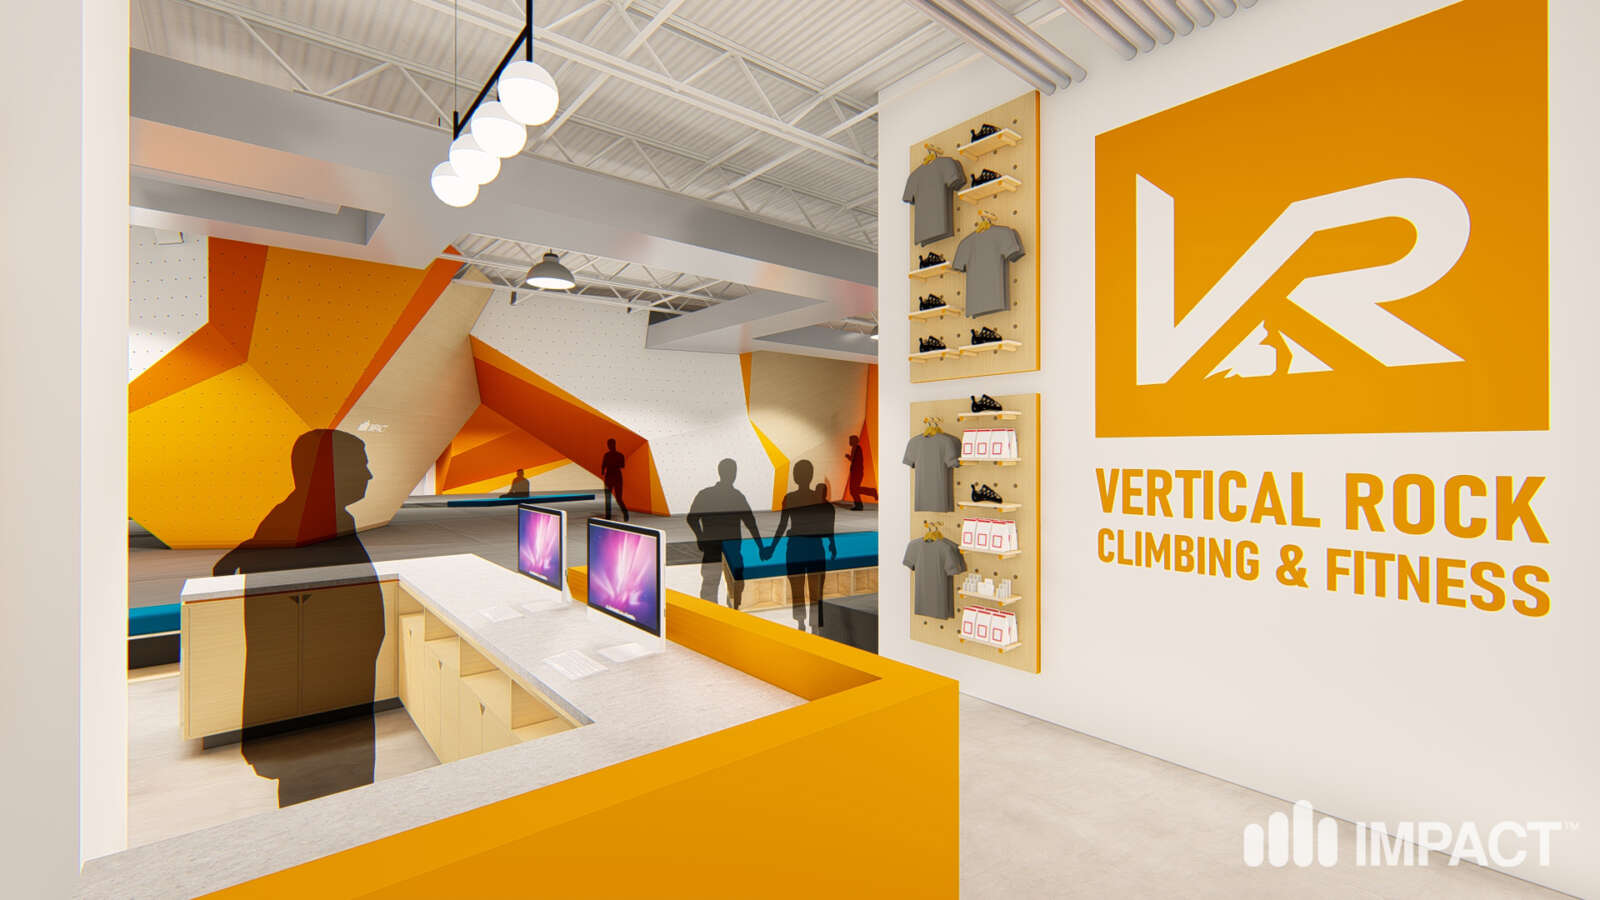 A rock bouldering gym is coming to Tysons, with coffee shop in tow